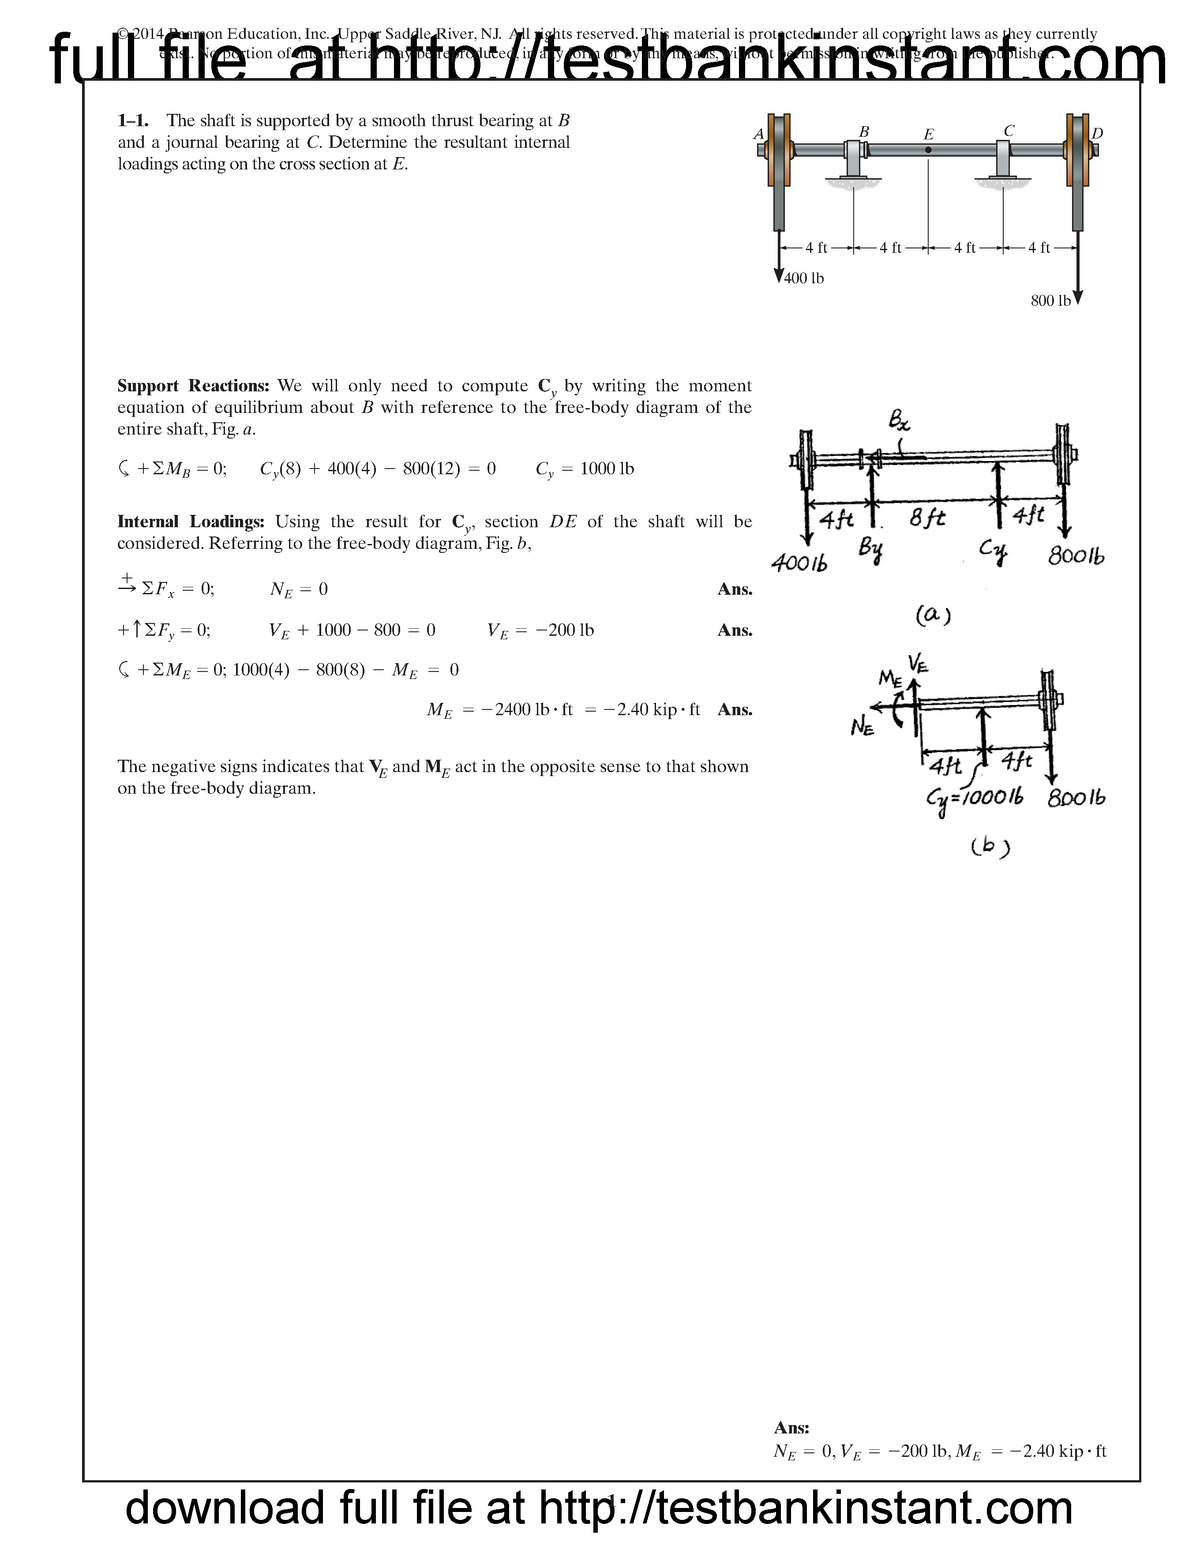 laser pint welvaart Solution Manual for Mechanics of Materials 9th Edition by Hibbeler - full  file at testbankinstant 1 - Studocu